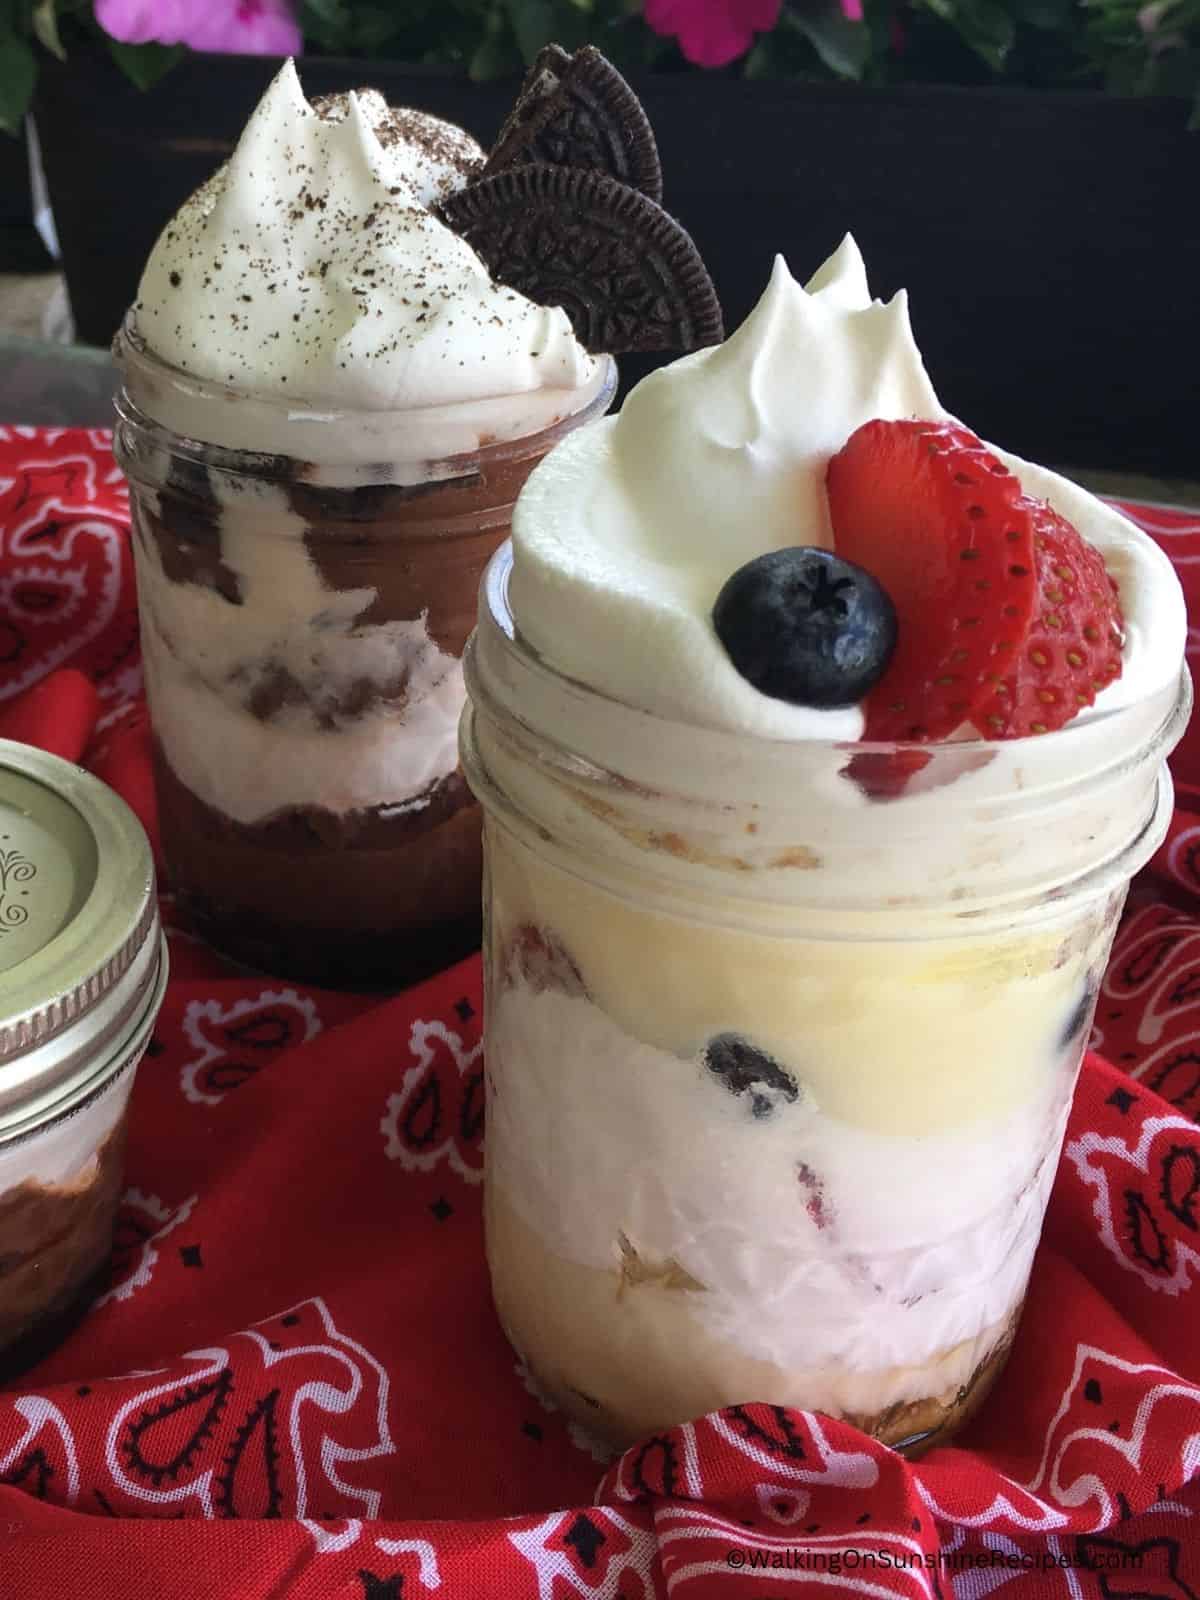 two mason jars of pudding with whipped cream.